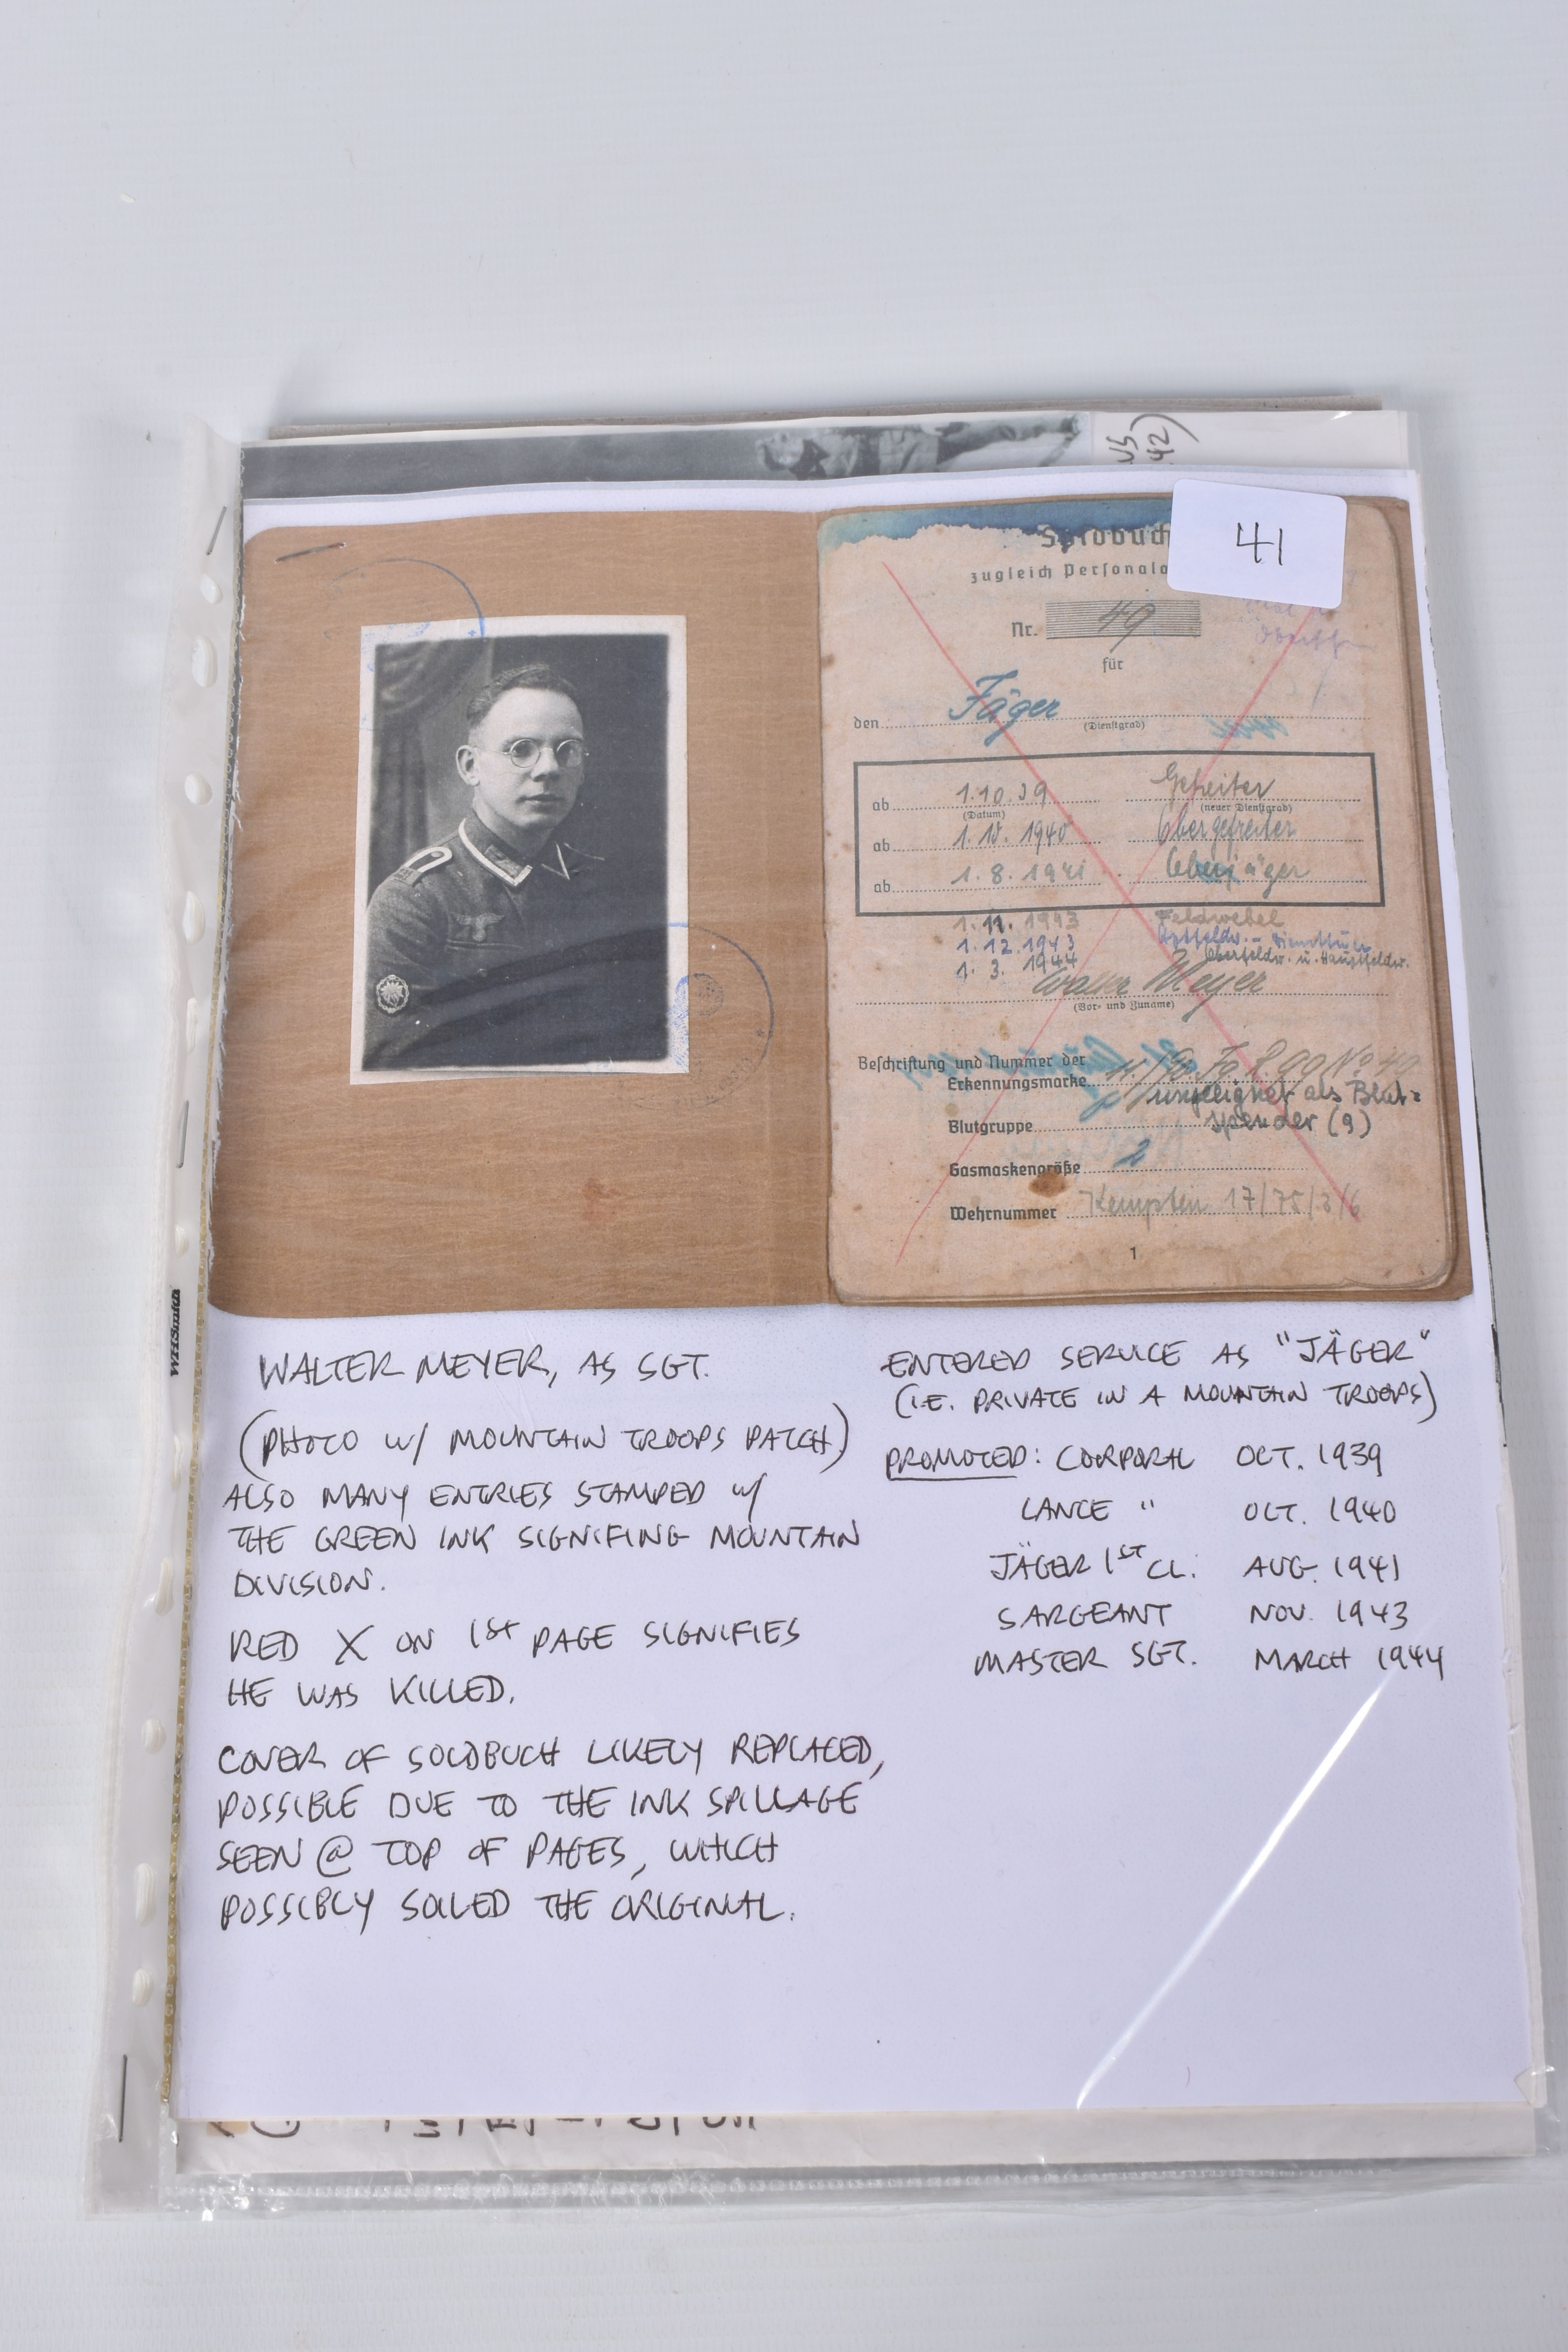 WALTER MEYER, SERGEANT, INCLUDES SOLDBUCH, photos, maps, and articles, red X through the Soldbuch